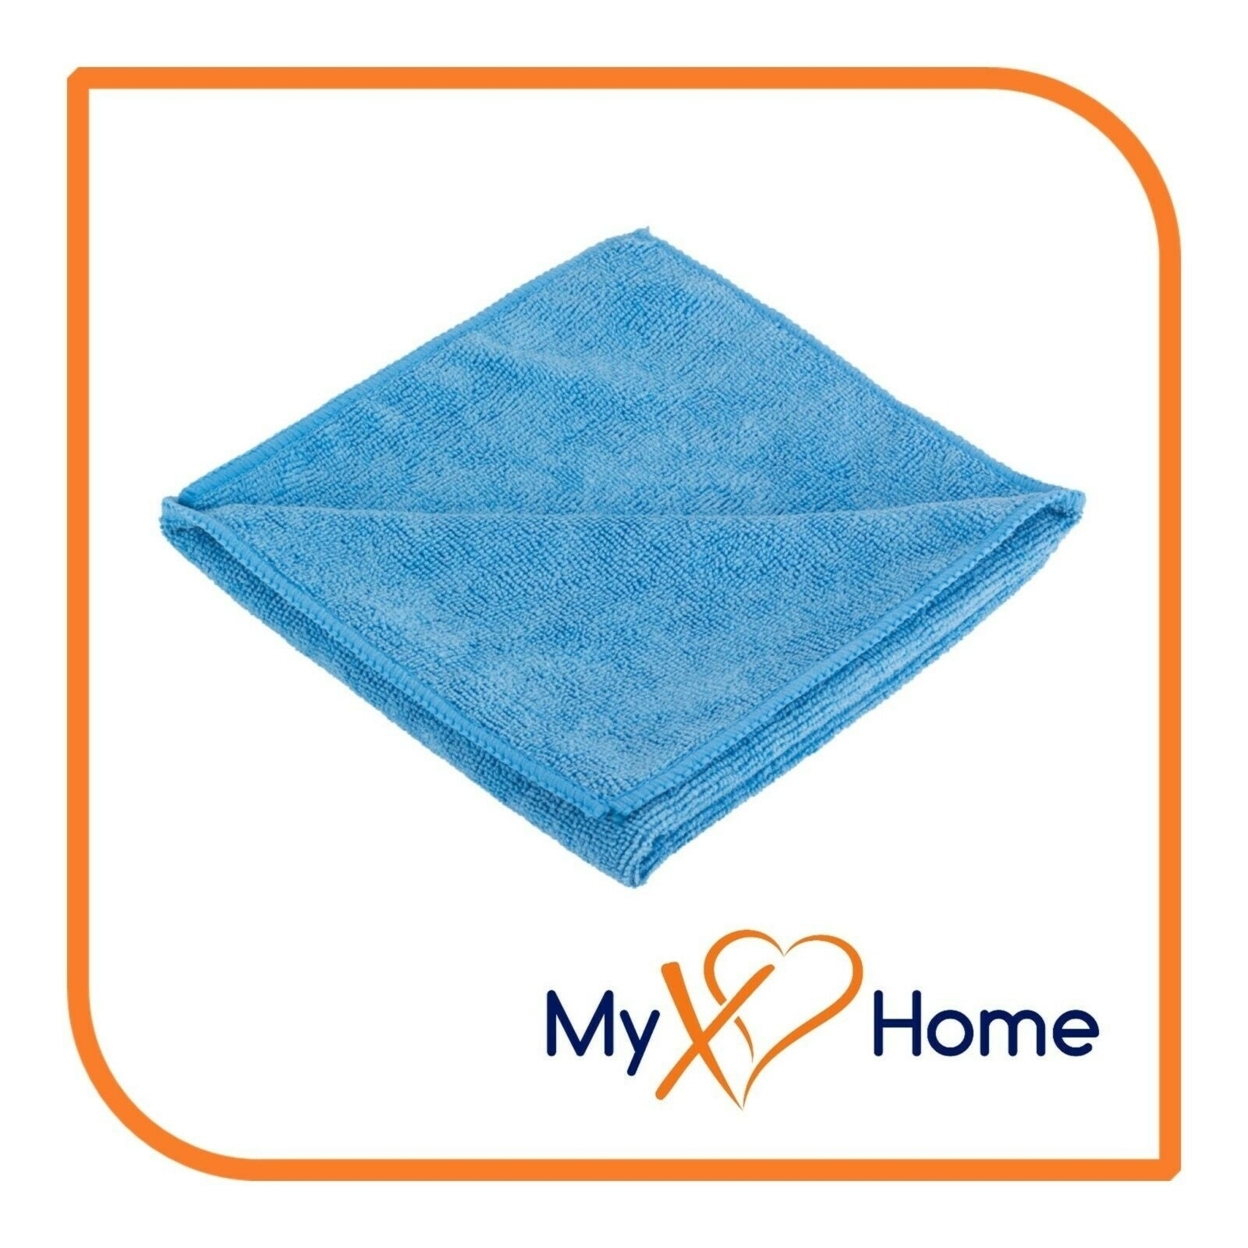 MyXOHome 16 x 16 Blue Microfiber Towel by MyXOHome XOH-CLE-TOW-MIC-1630x120 j) 120 Towels